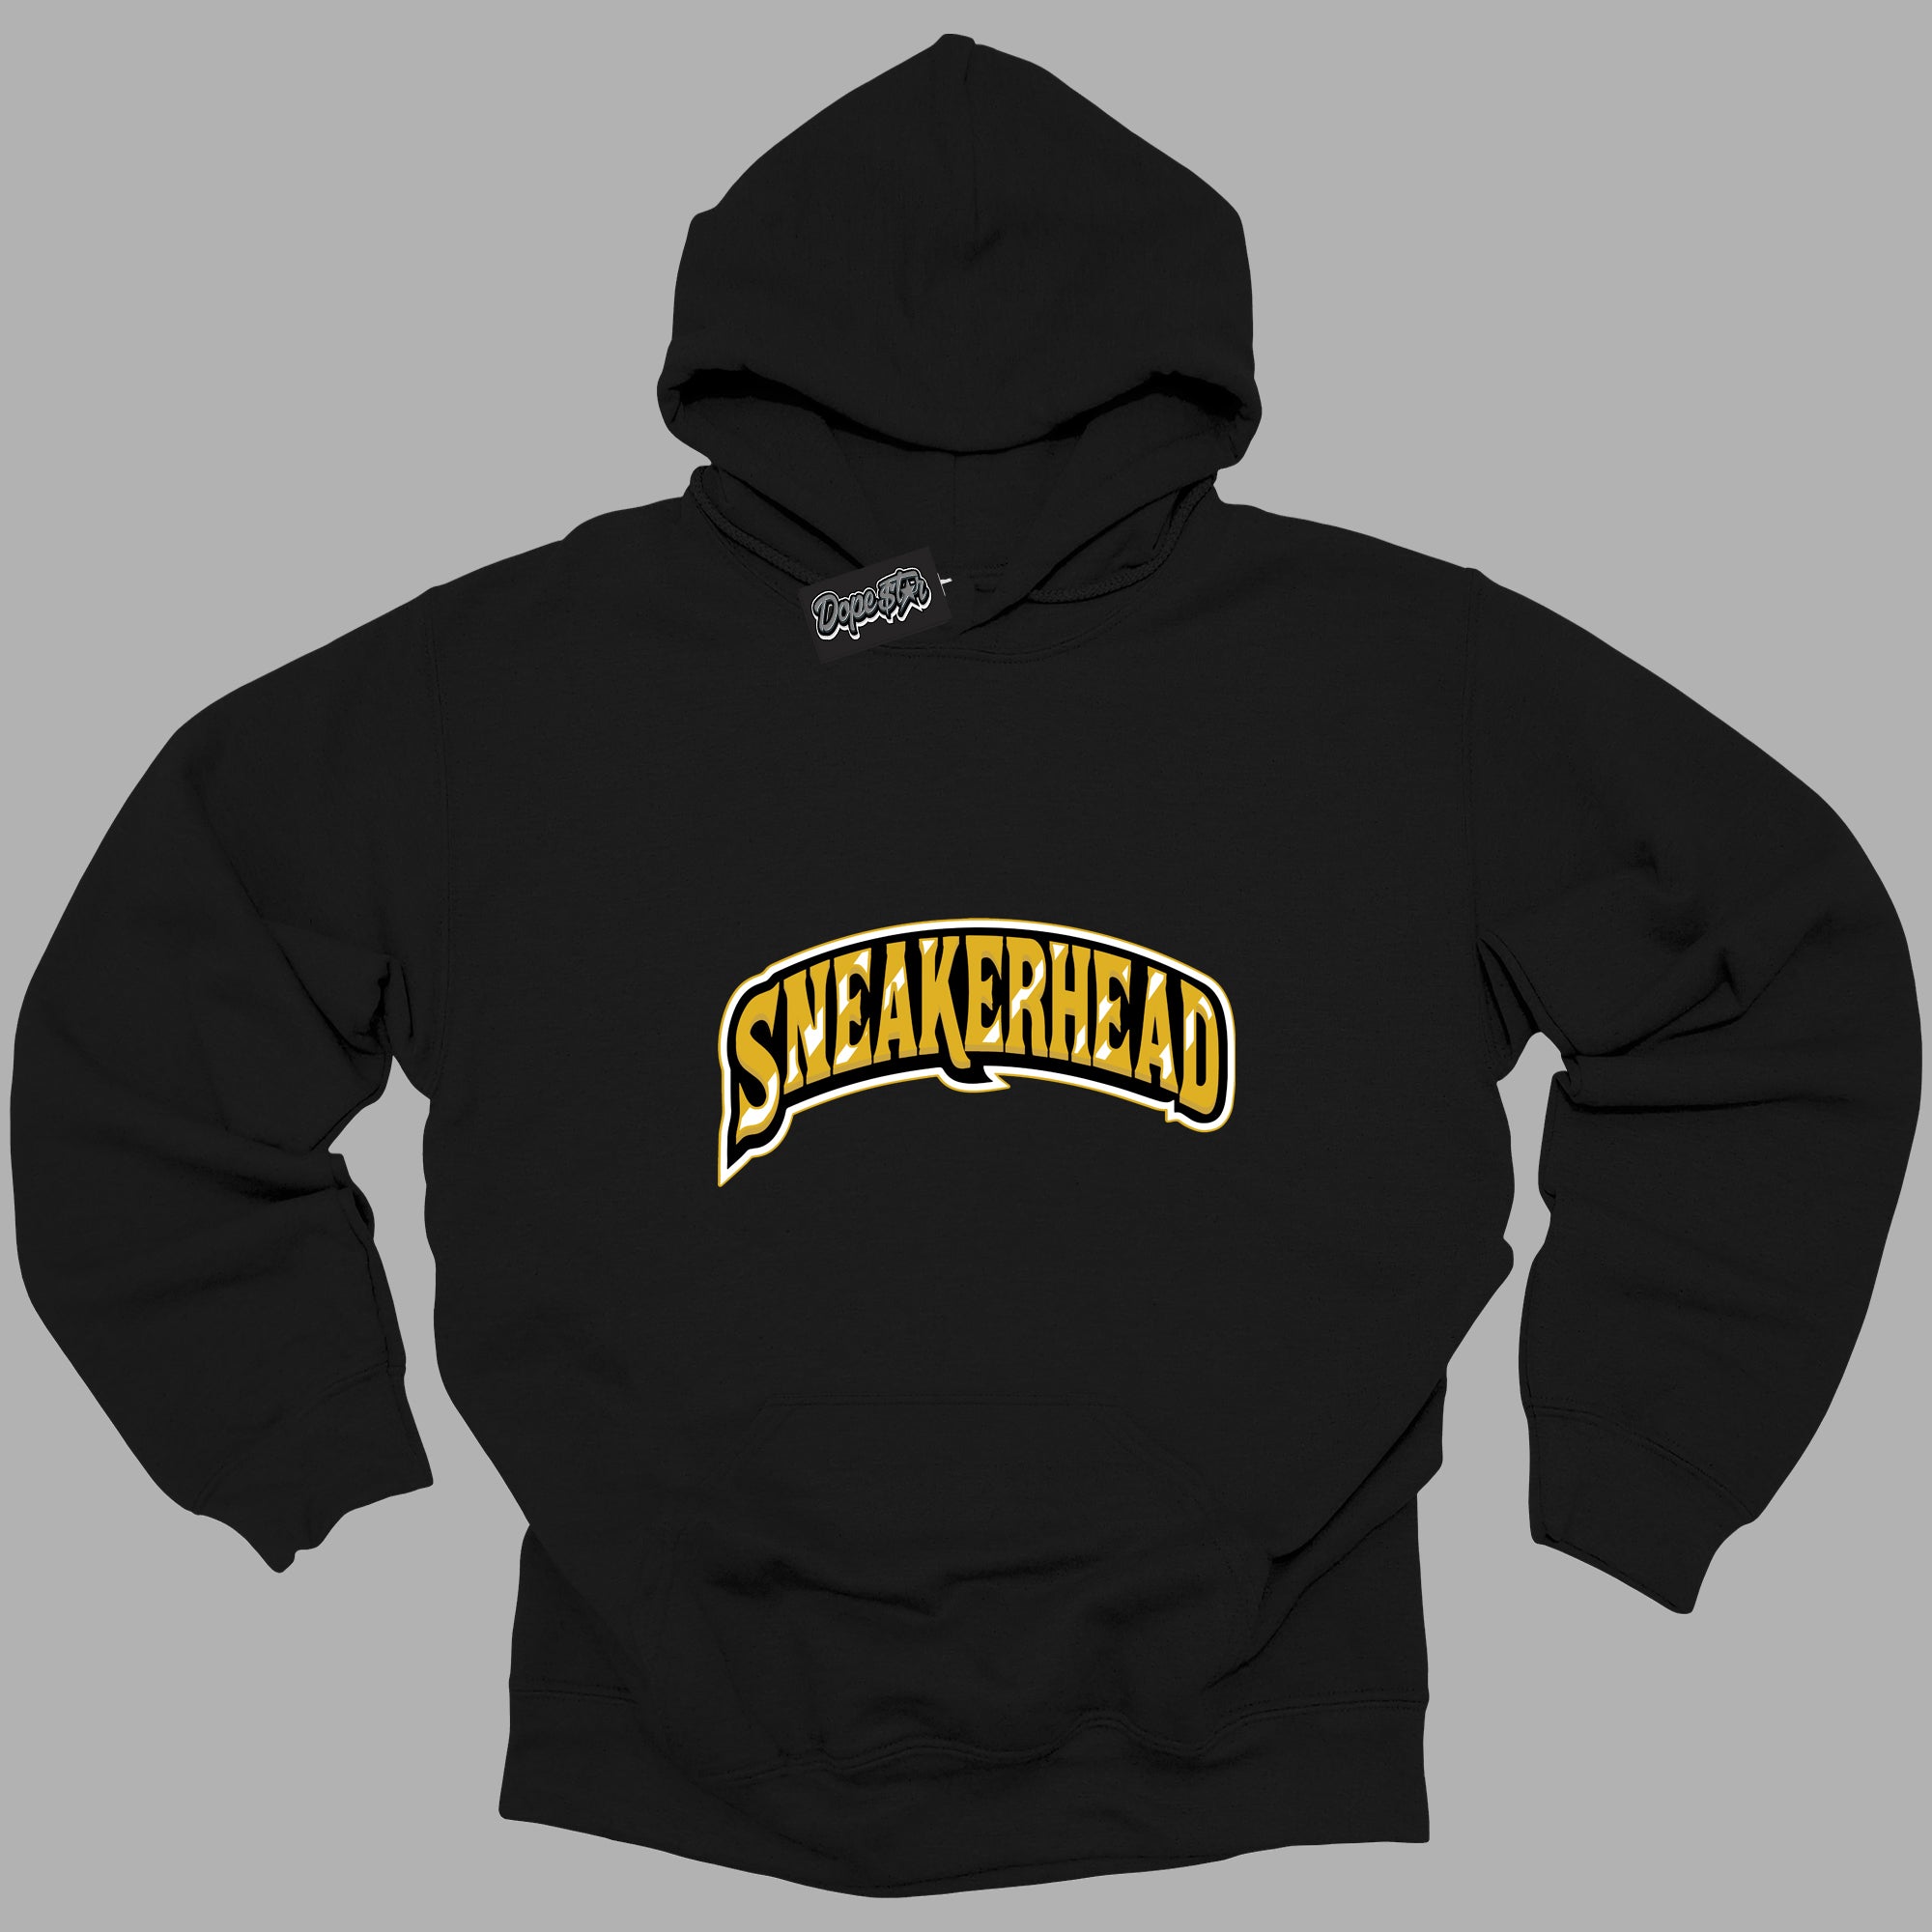 Cool Black Hoodie with “ Sneakerhead ”  design that Perfectly Matches Yellow Ochre 6s Sneakers.